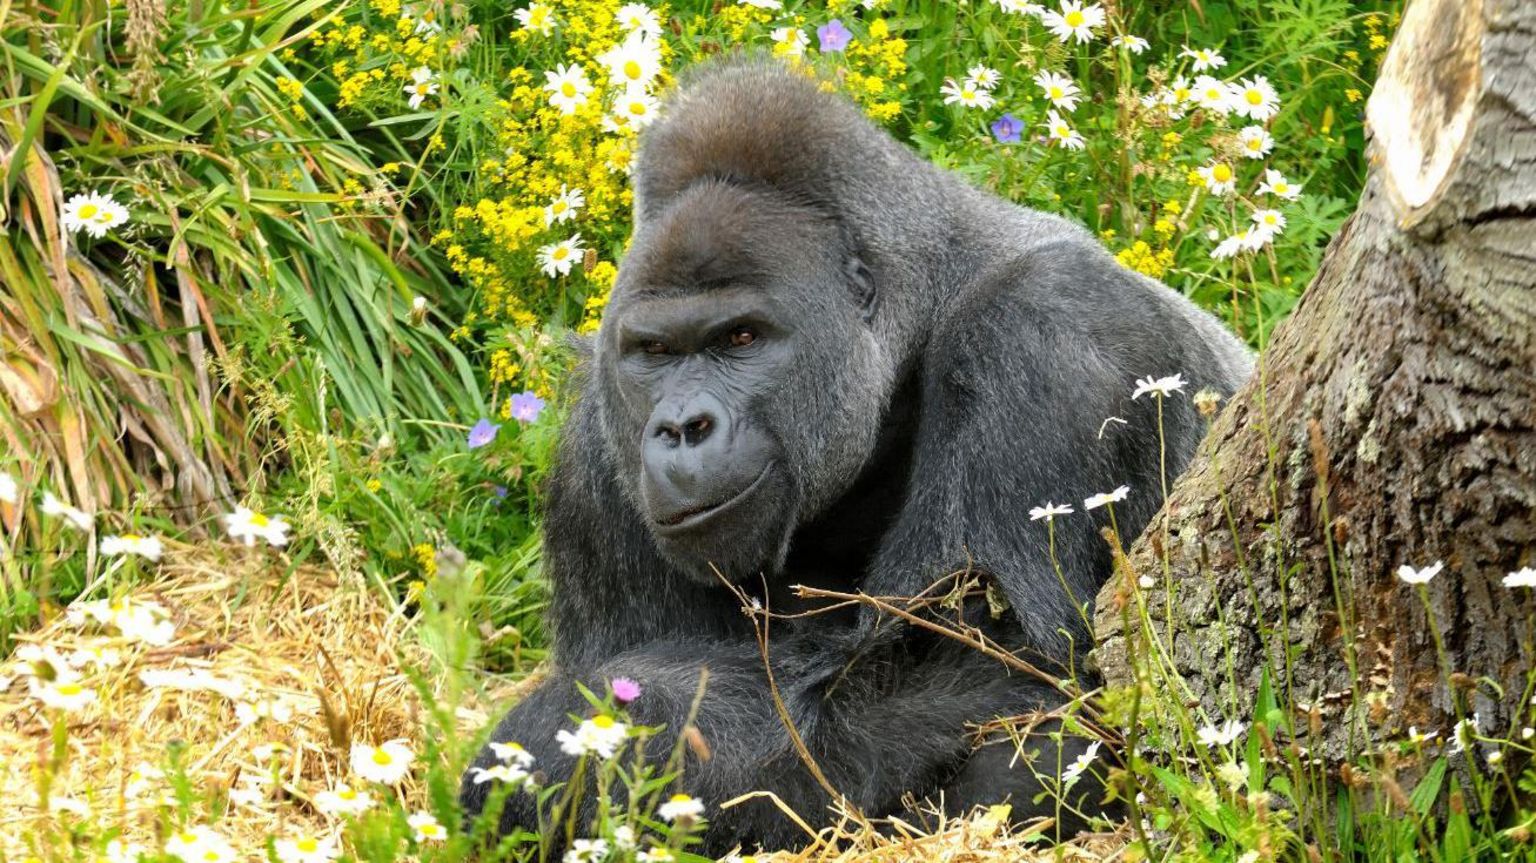 A gorilla sitting among grass beside a tree. He is looking at the camera and appears to be smirking. There are lots of flowers in the background